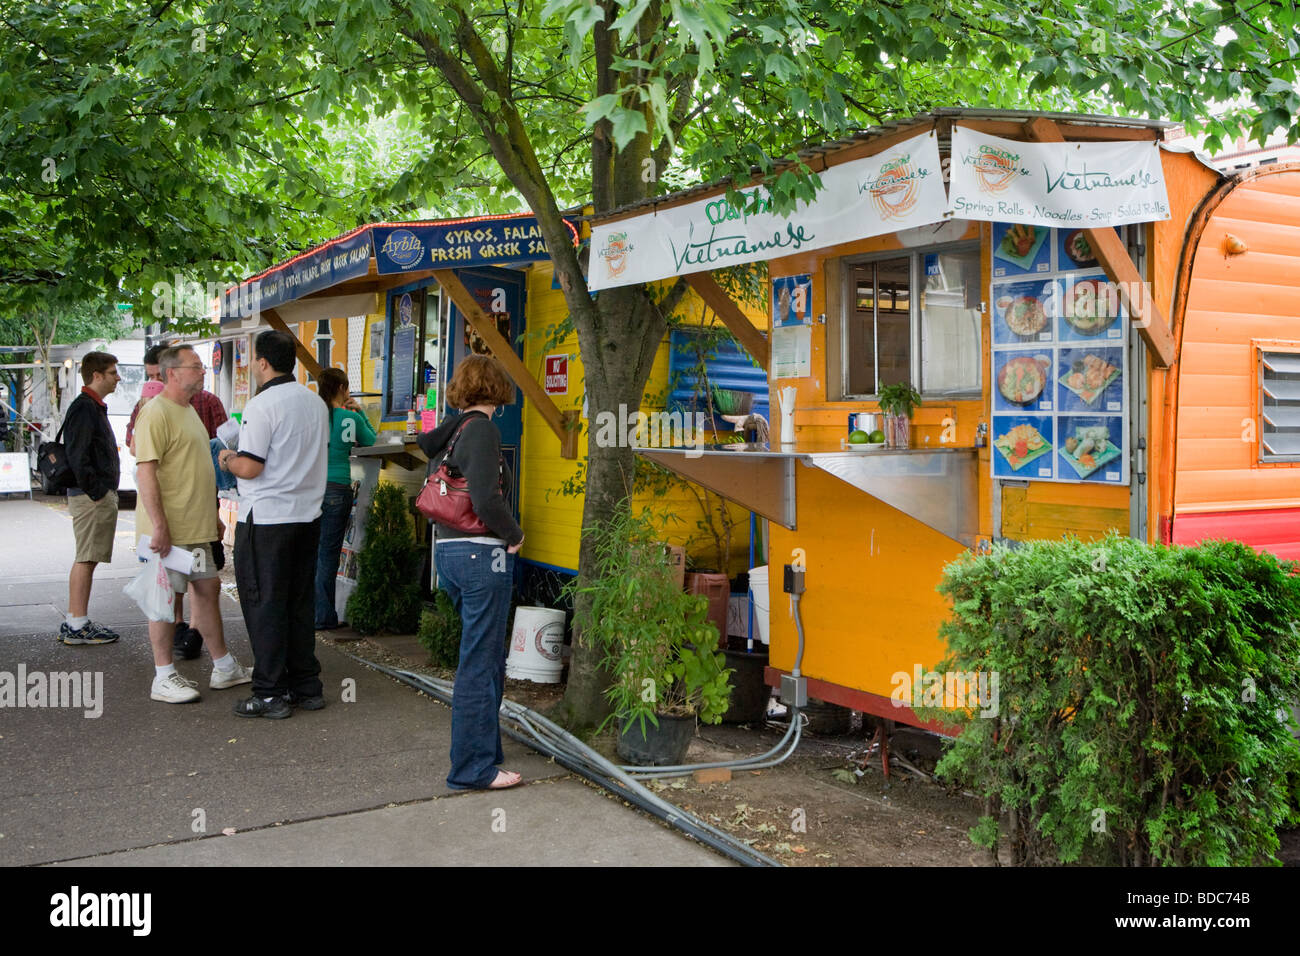 Portland, Oregon is renowned for its many food carts and food trucks. USA. Stock Photo